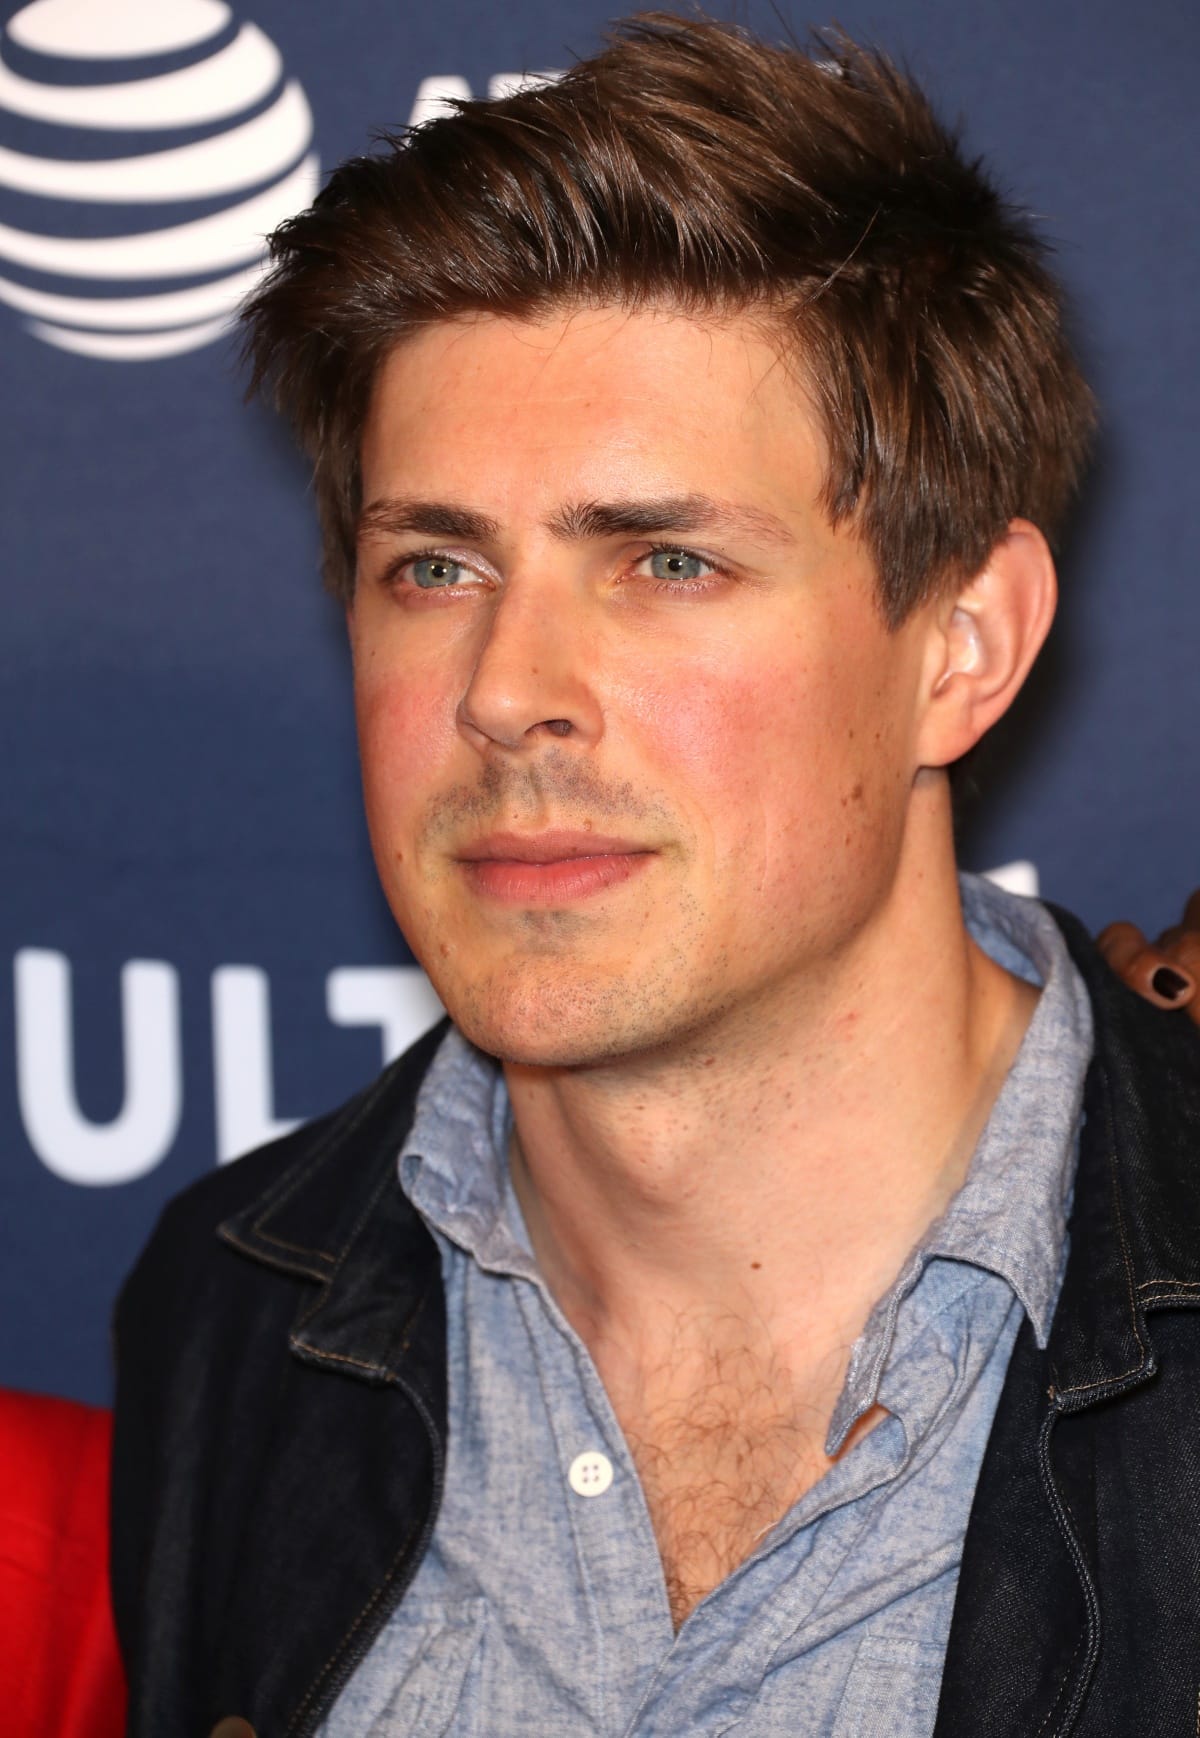 Chris Lowell at the 2018 Vulture Festival